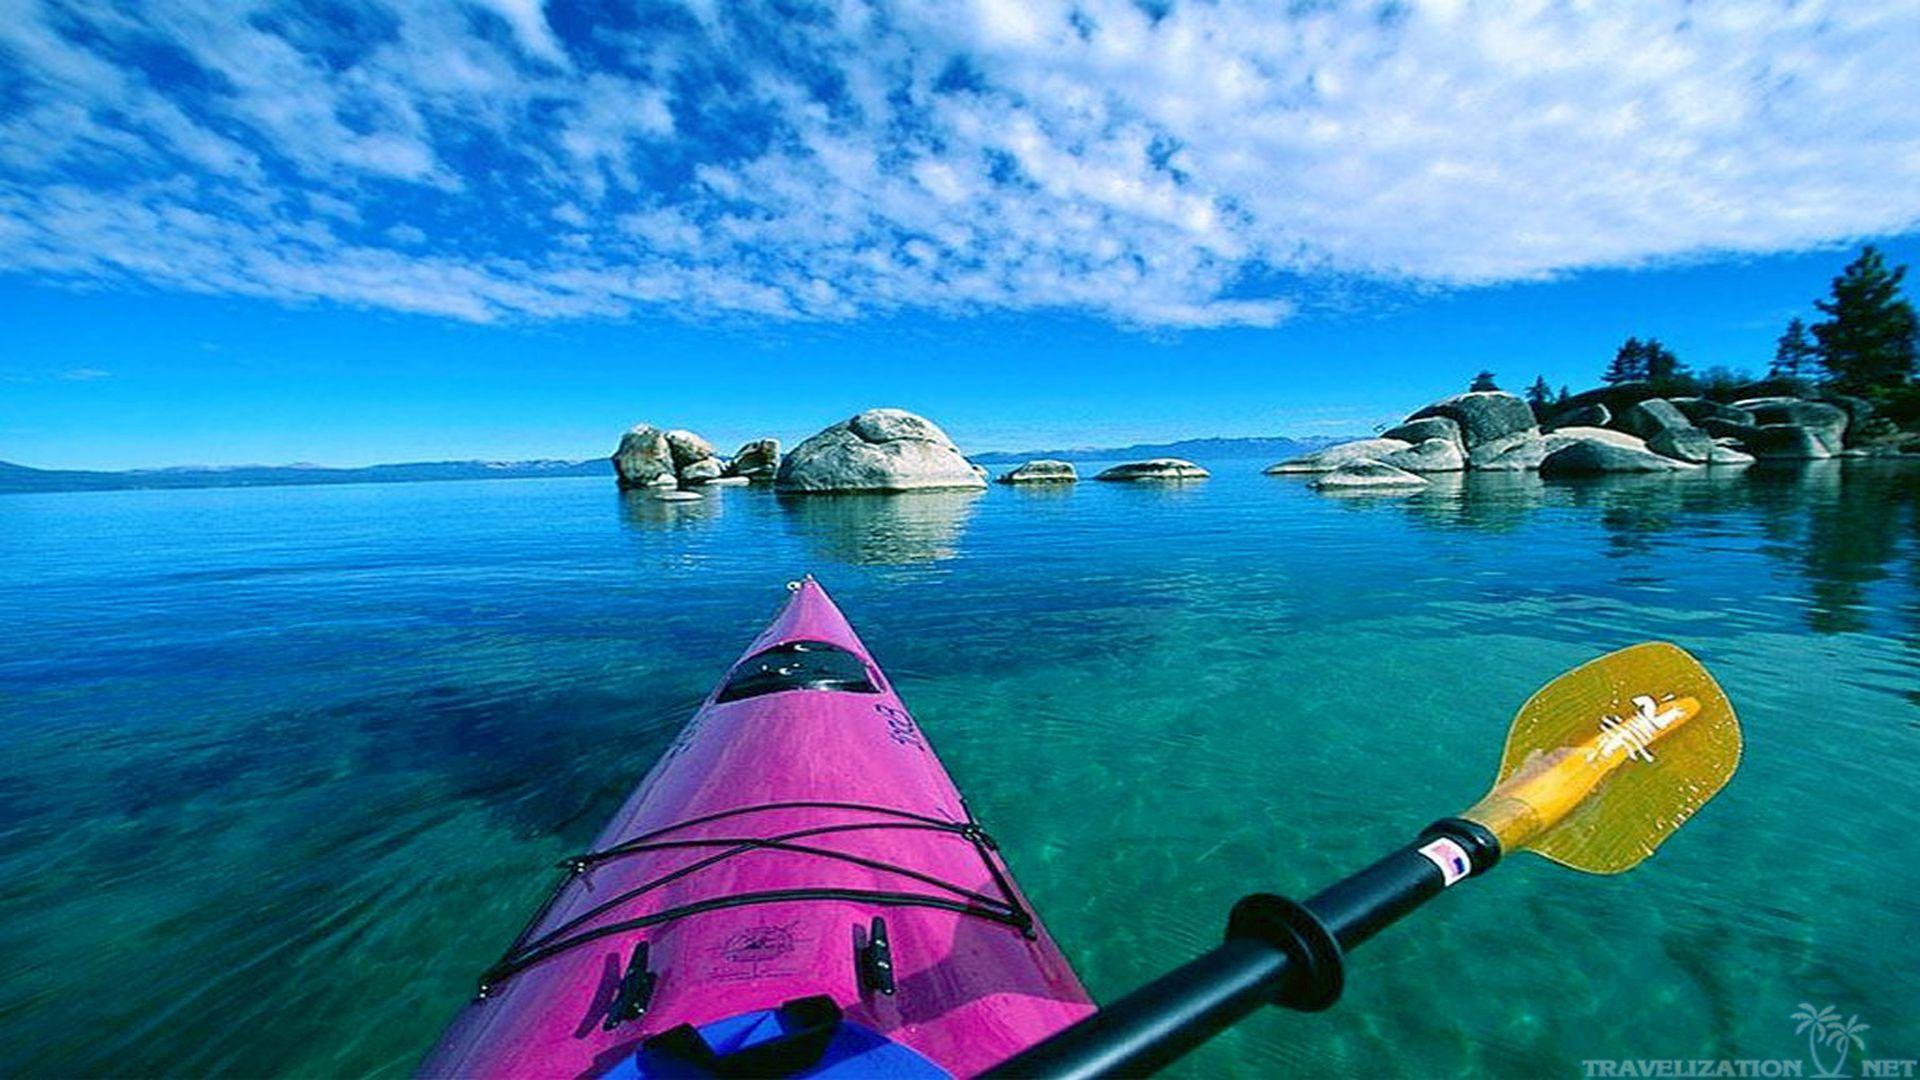 Widescreen Full HD Wallpaper of Kayak for Windows and Mac Systems